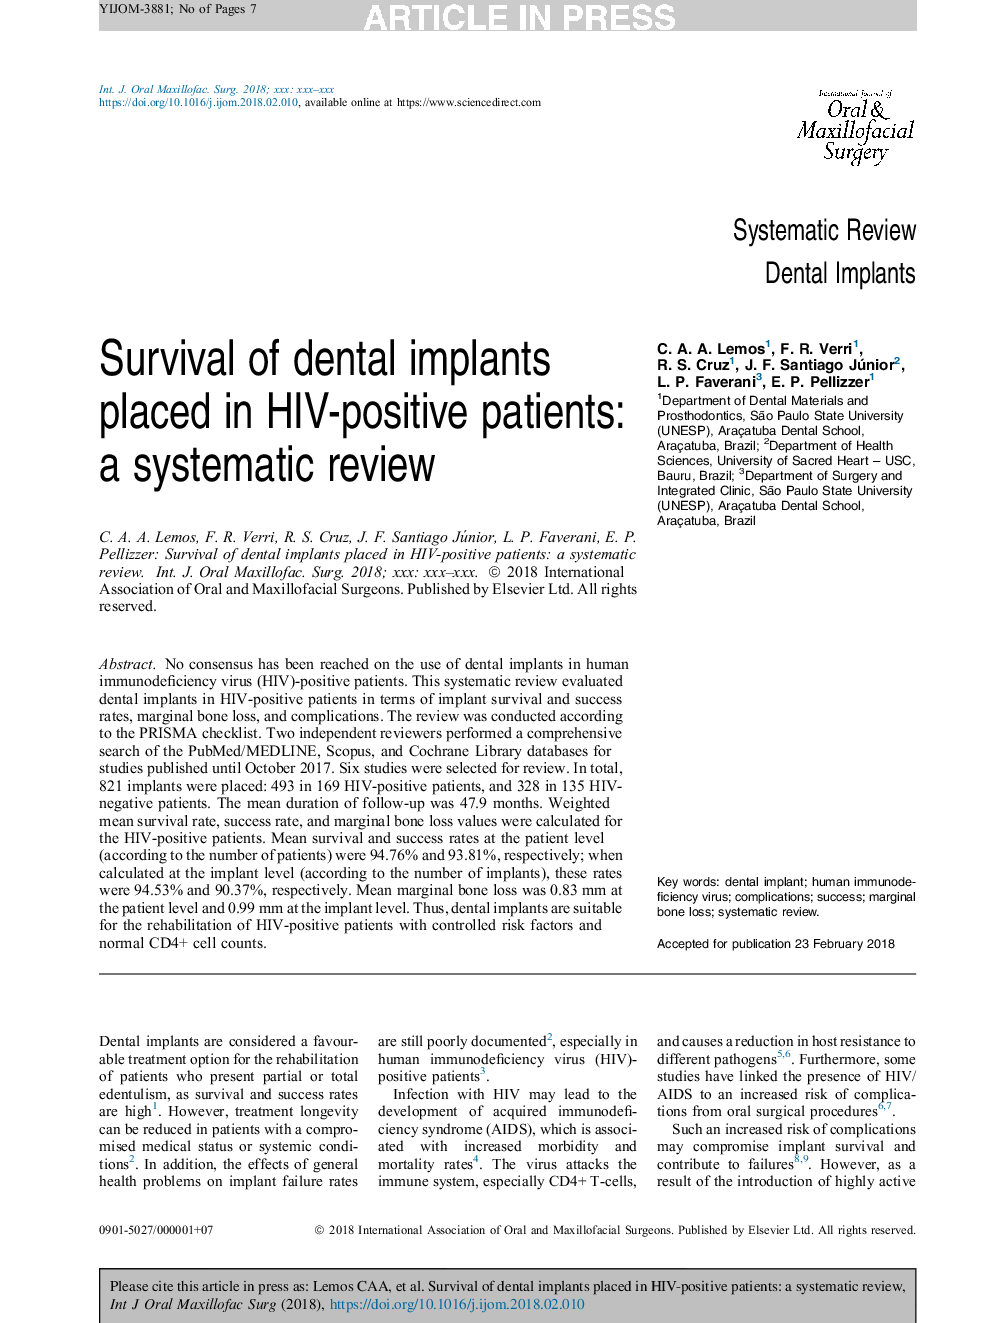 Survival of dental implants placed in HIV-positive patients: a systematic review